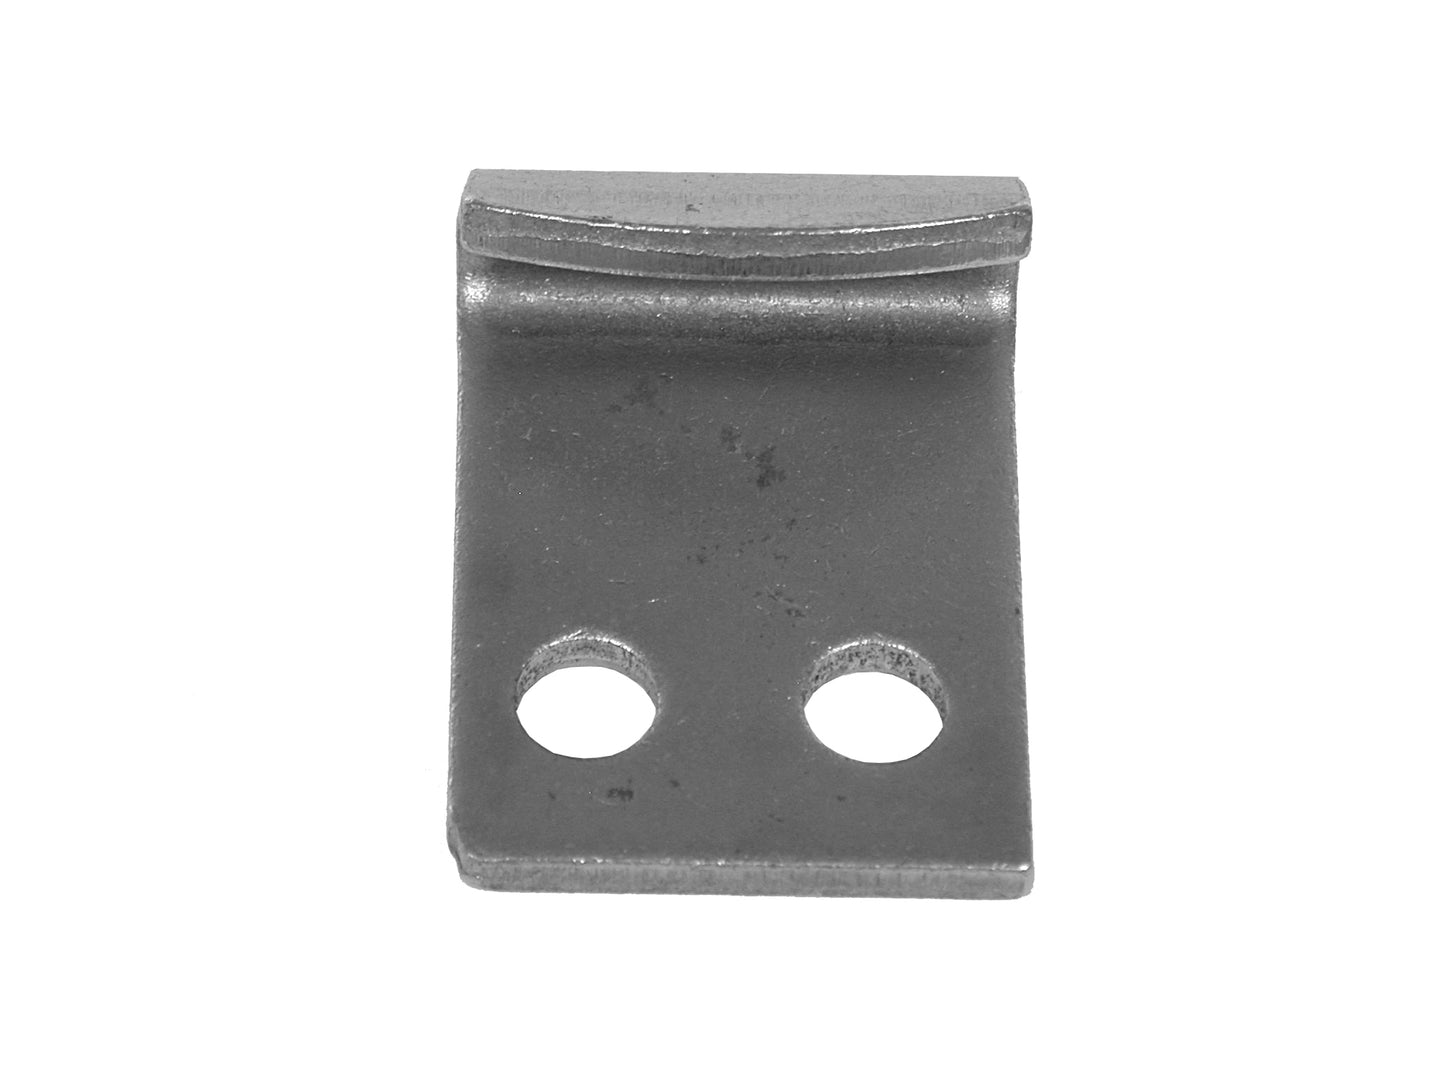 Latch Plate for K-10 Clamp, KC6275